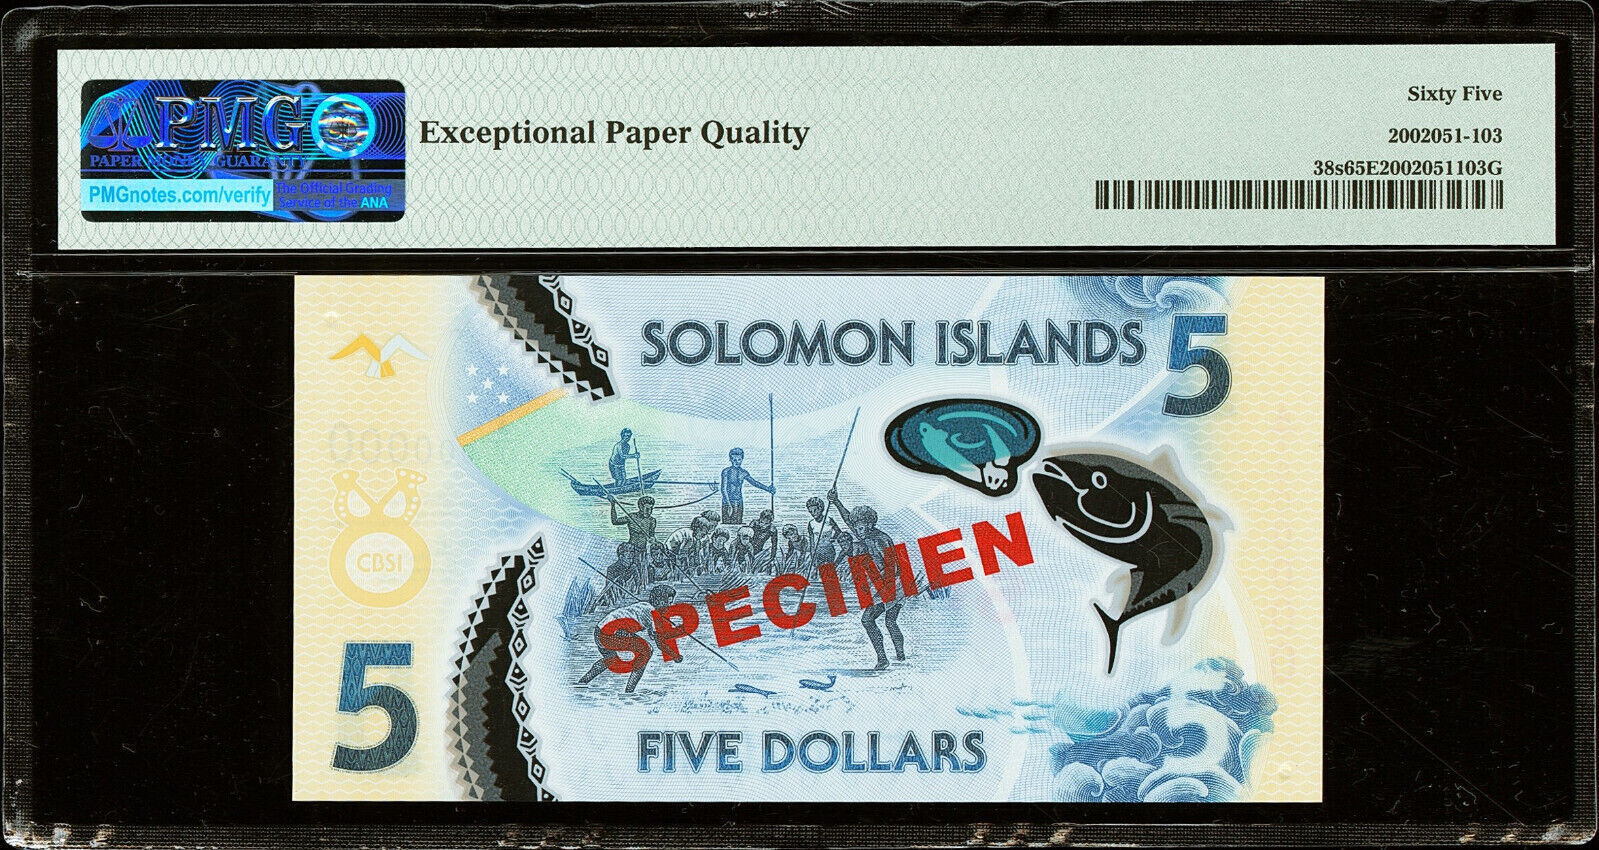 $ SOLOMON ISLANDS - 5 DOLLARS nd 1997 - P 19 - UNC ; free shipping from 75 €